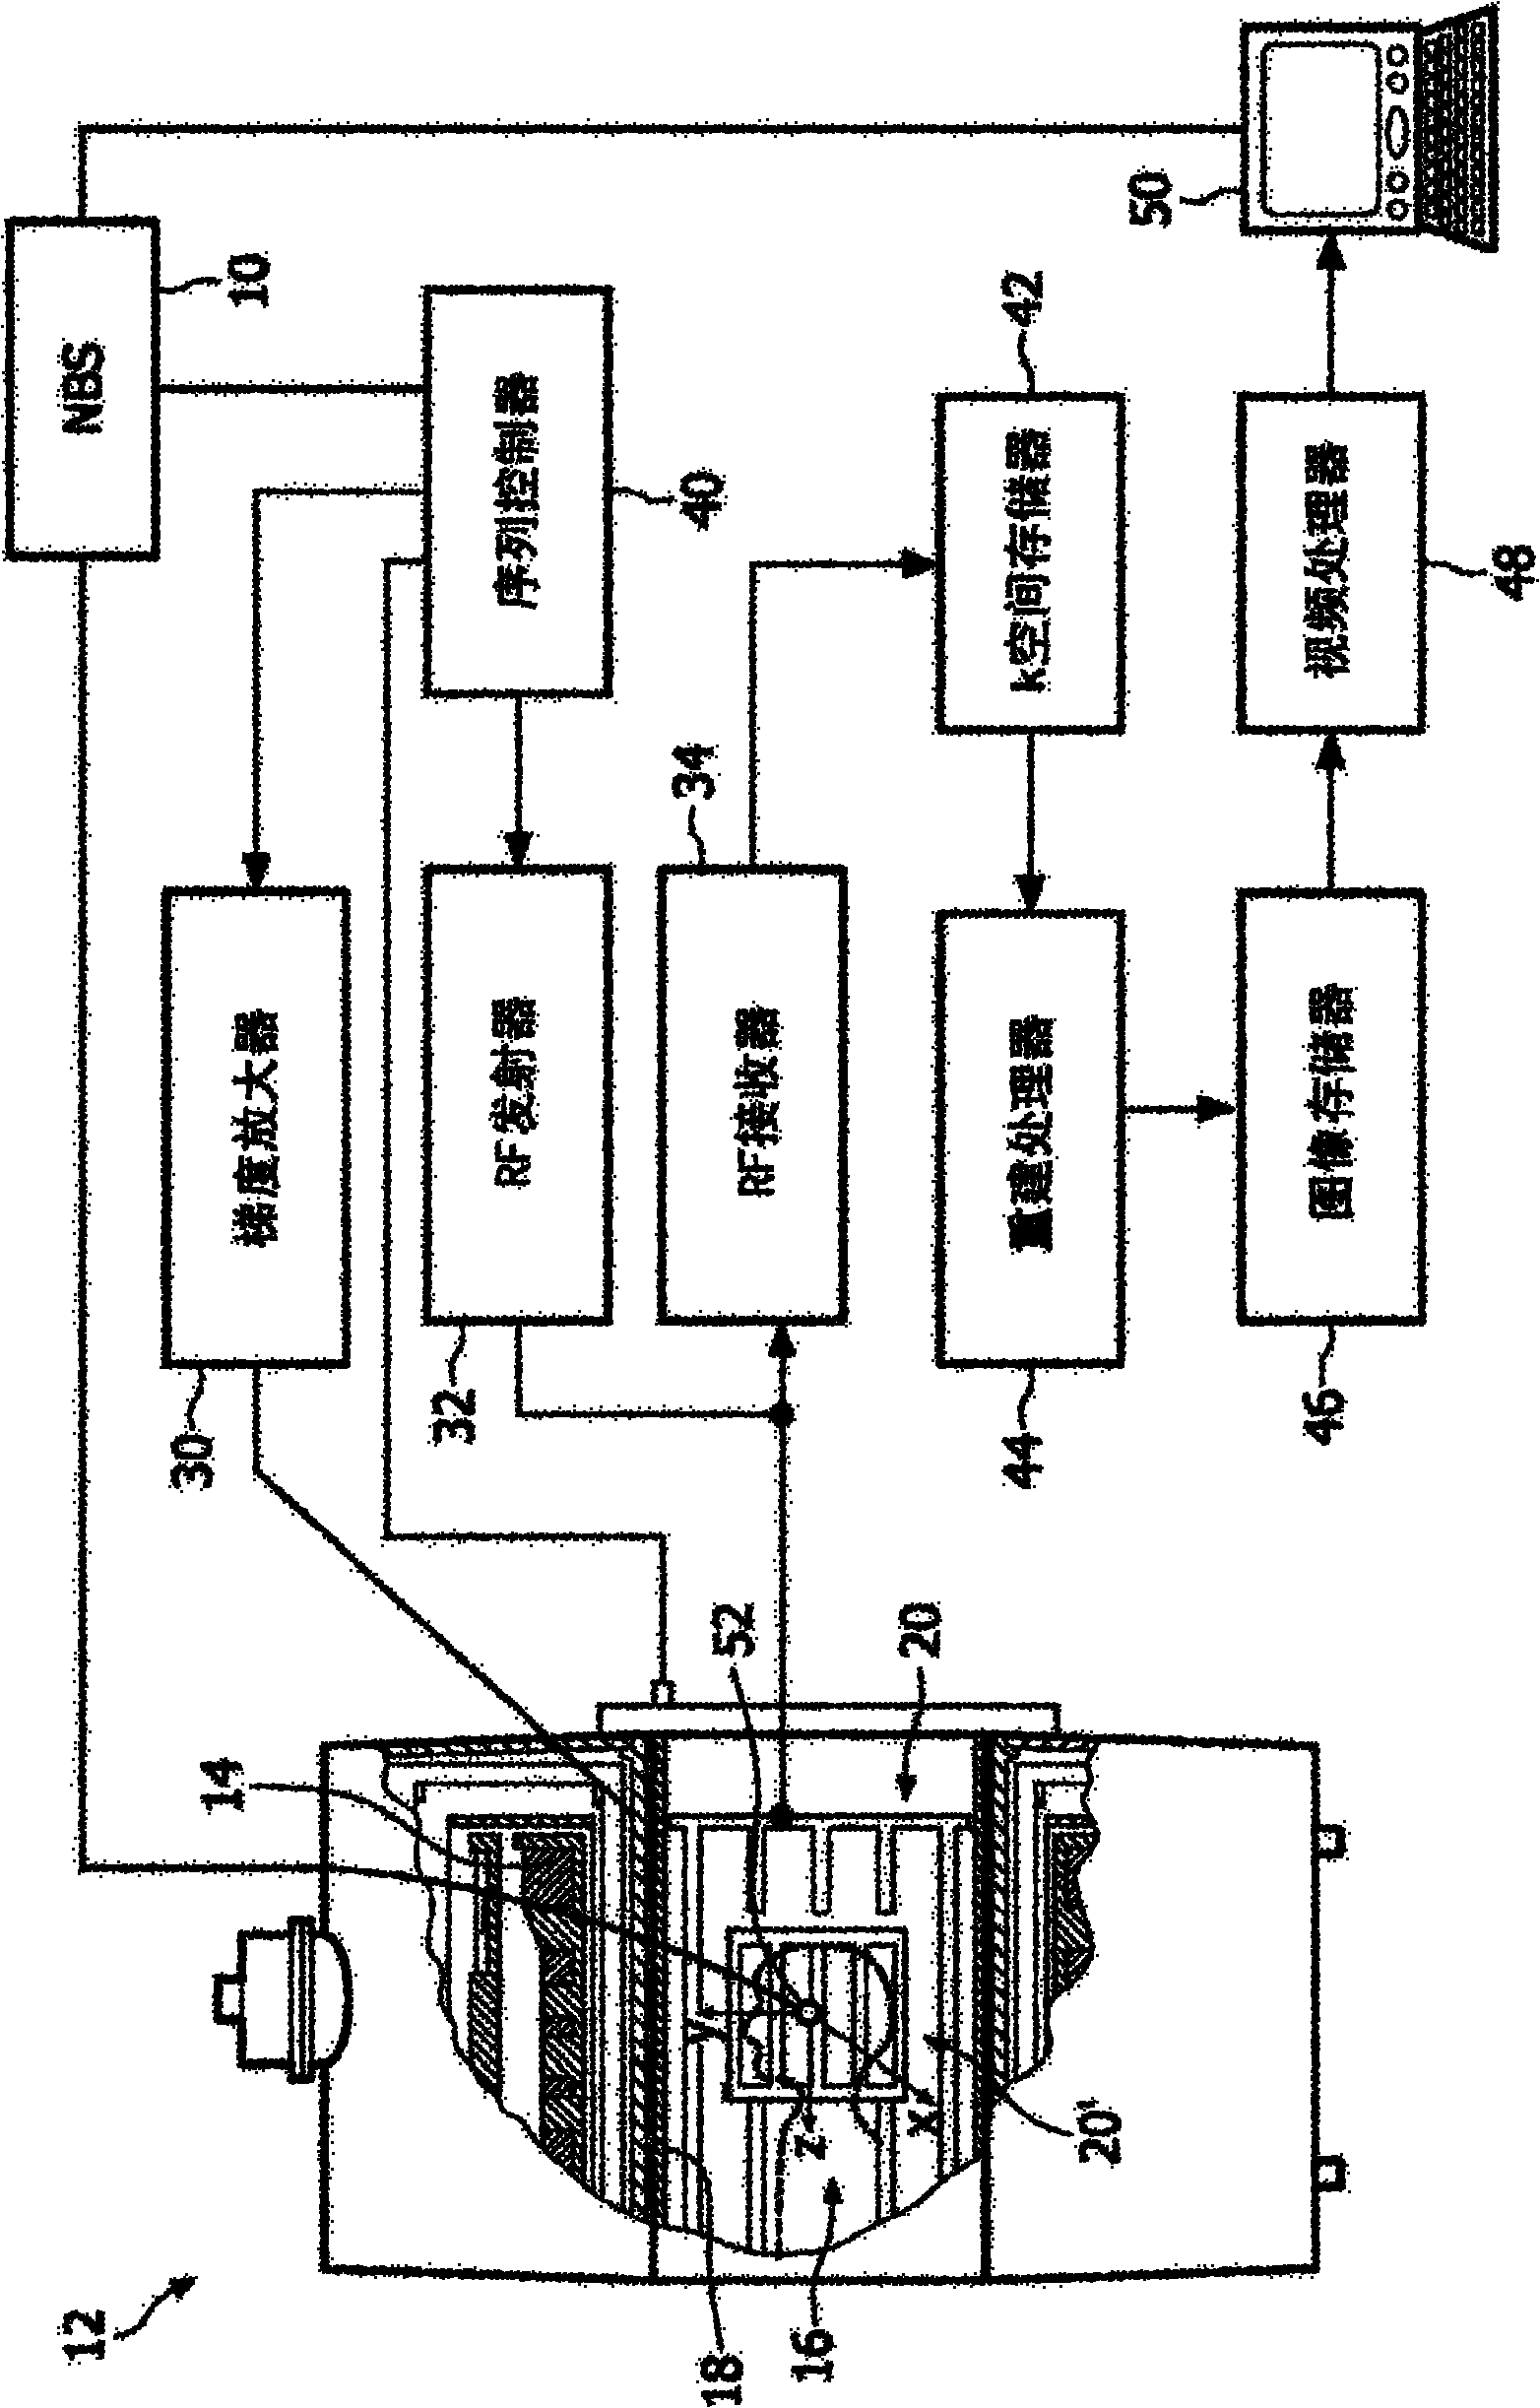 Gradient coil noise masking for MRI device